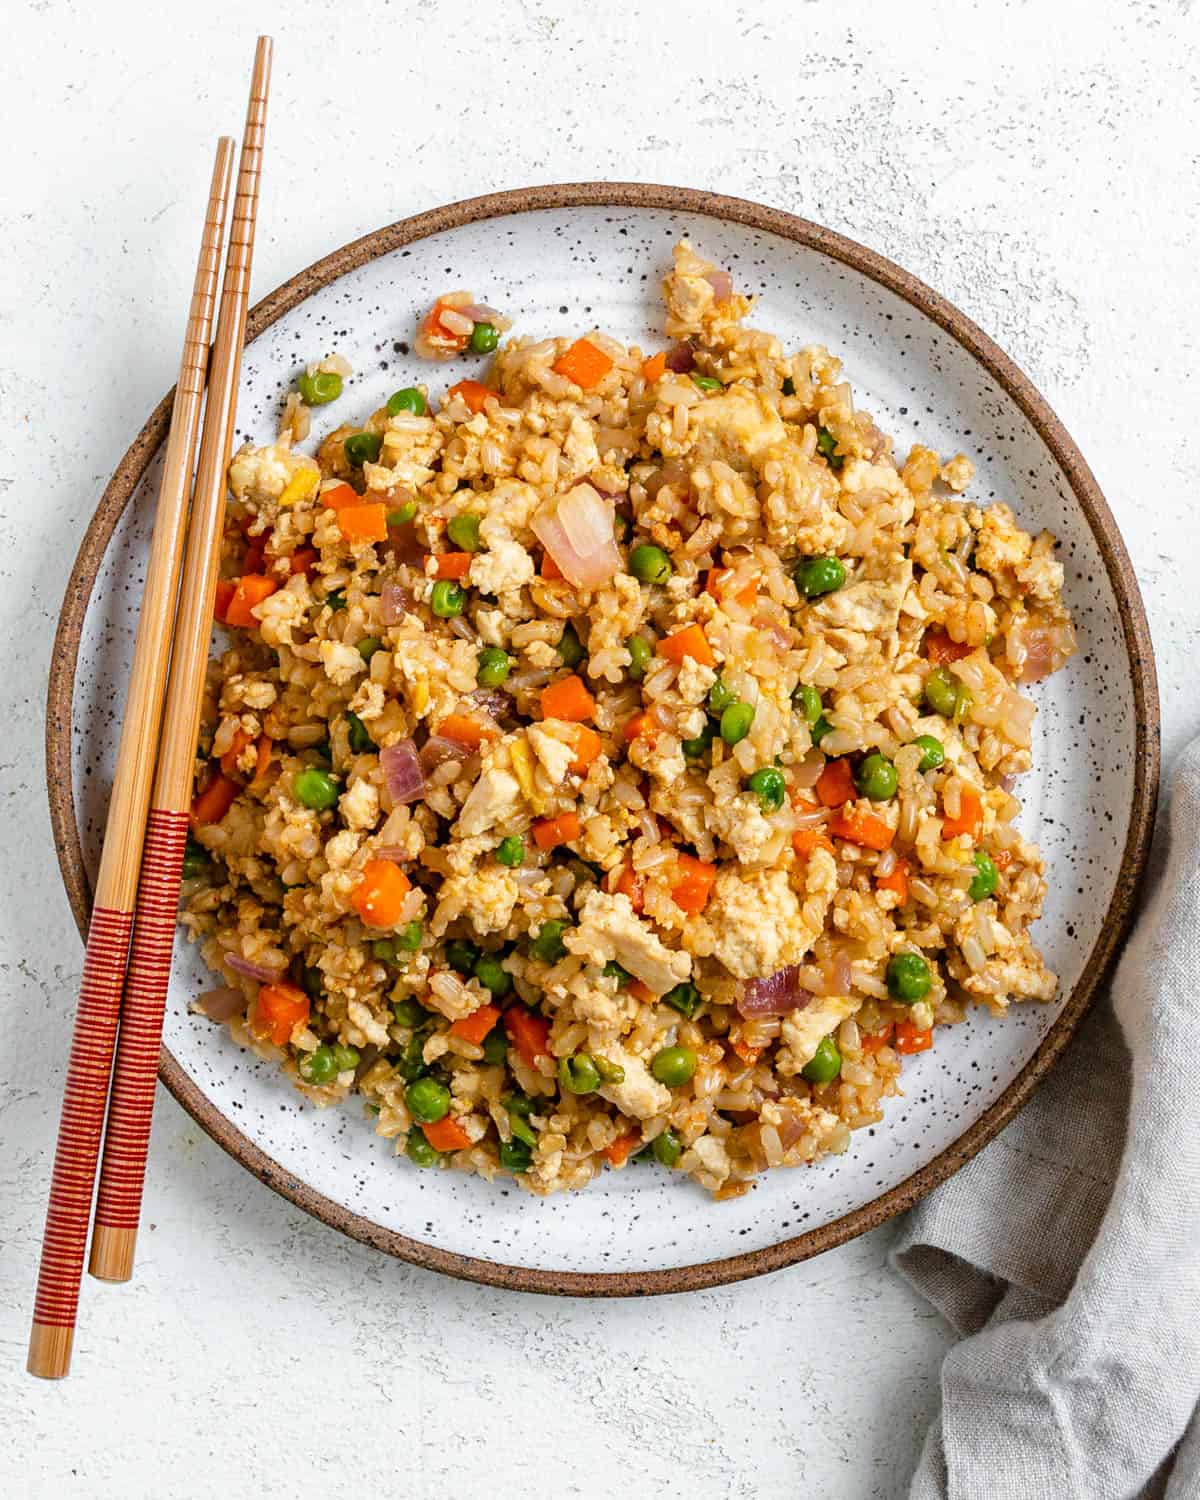 completed Easy Vegetable Brown Fried Rice plated on a white plate against a light background alongside chopsticks